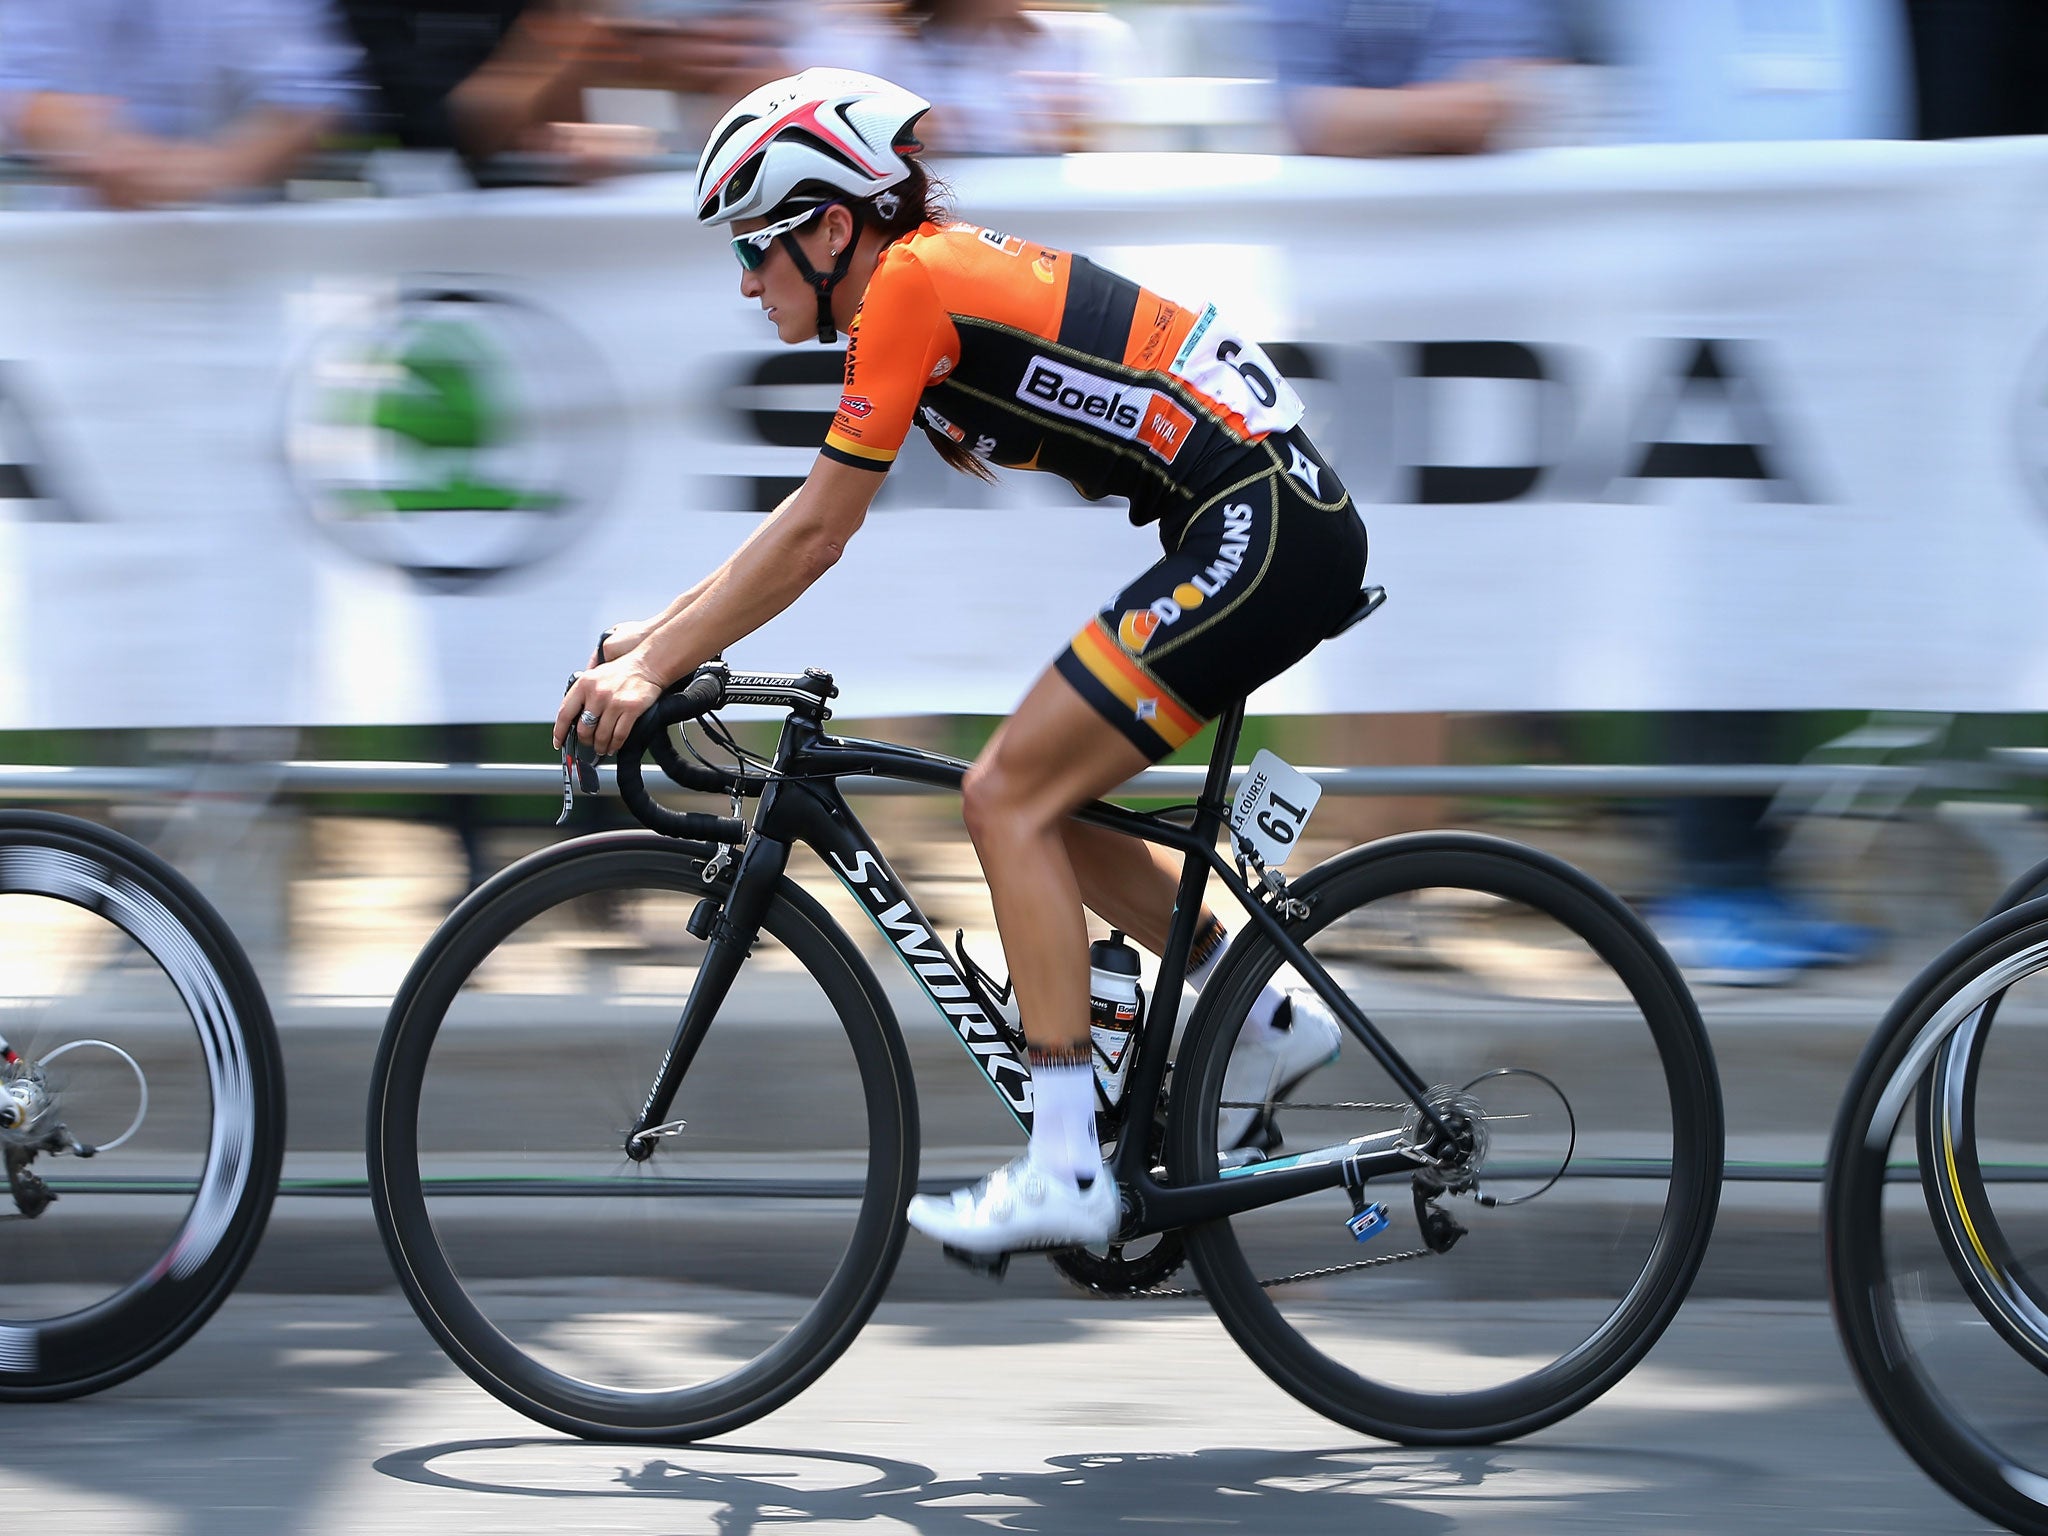 Britain's Lizzie Armitstead in action on Sunday during La Course